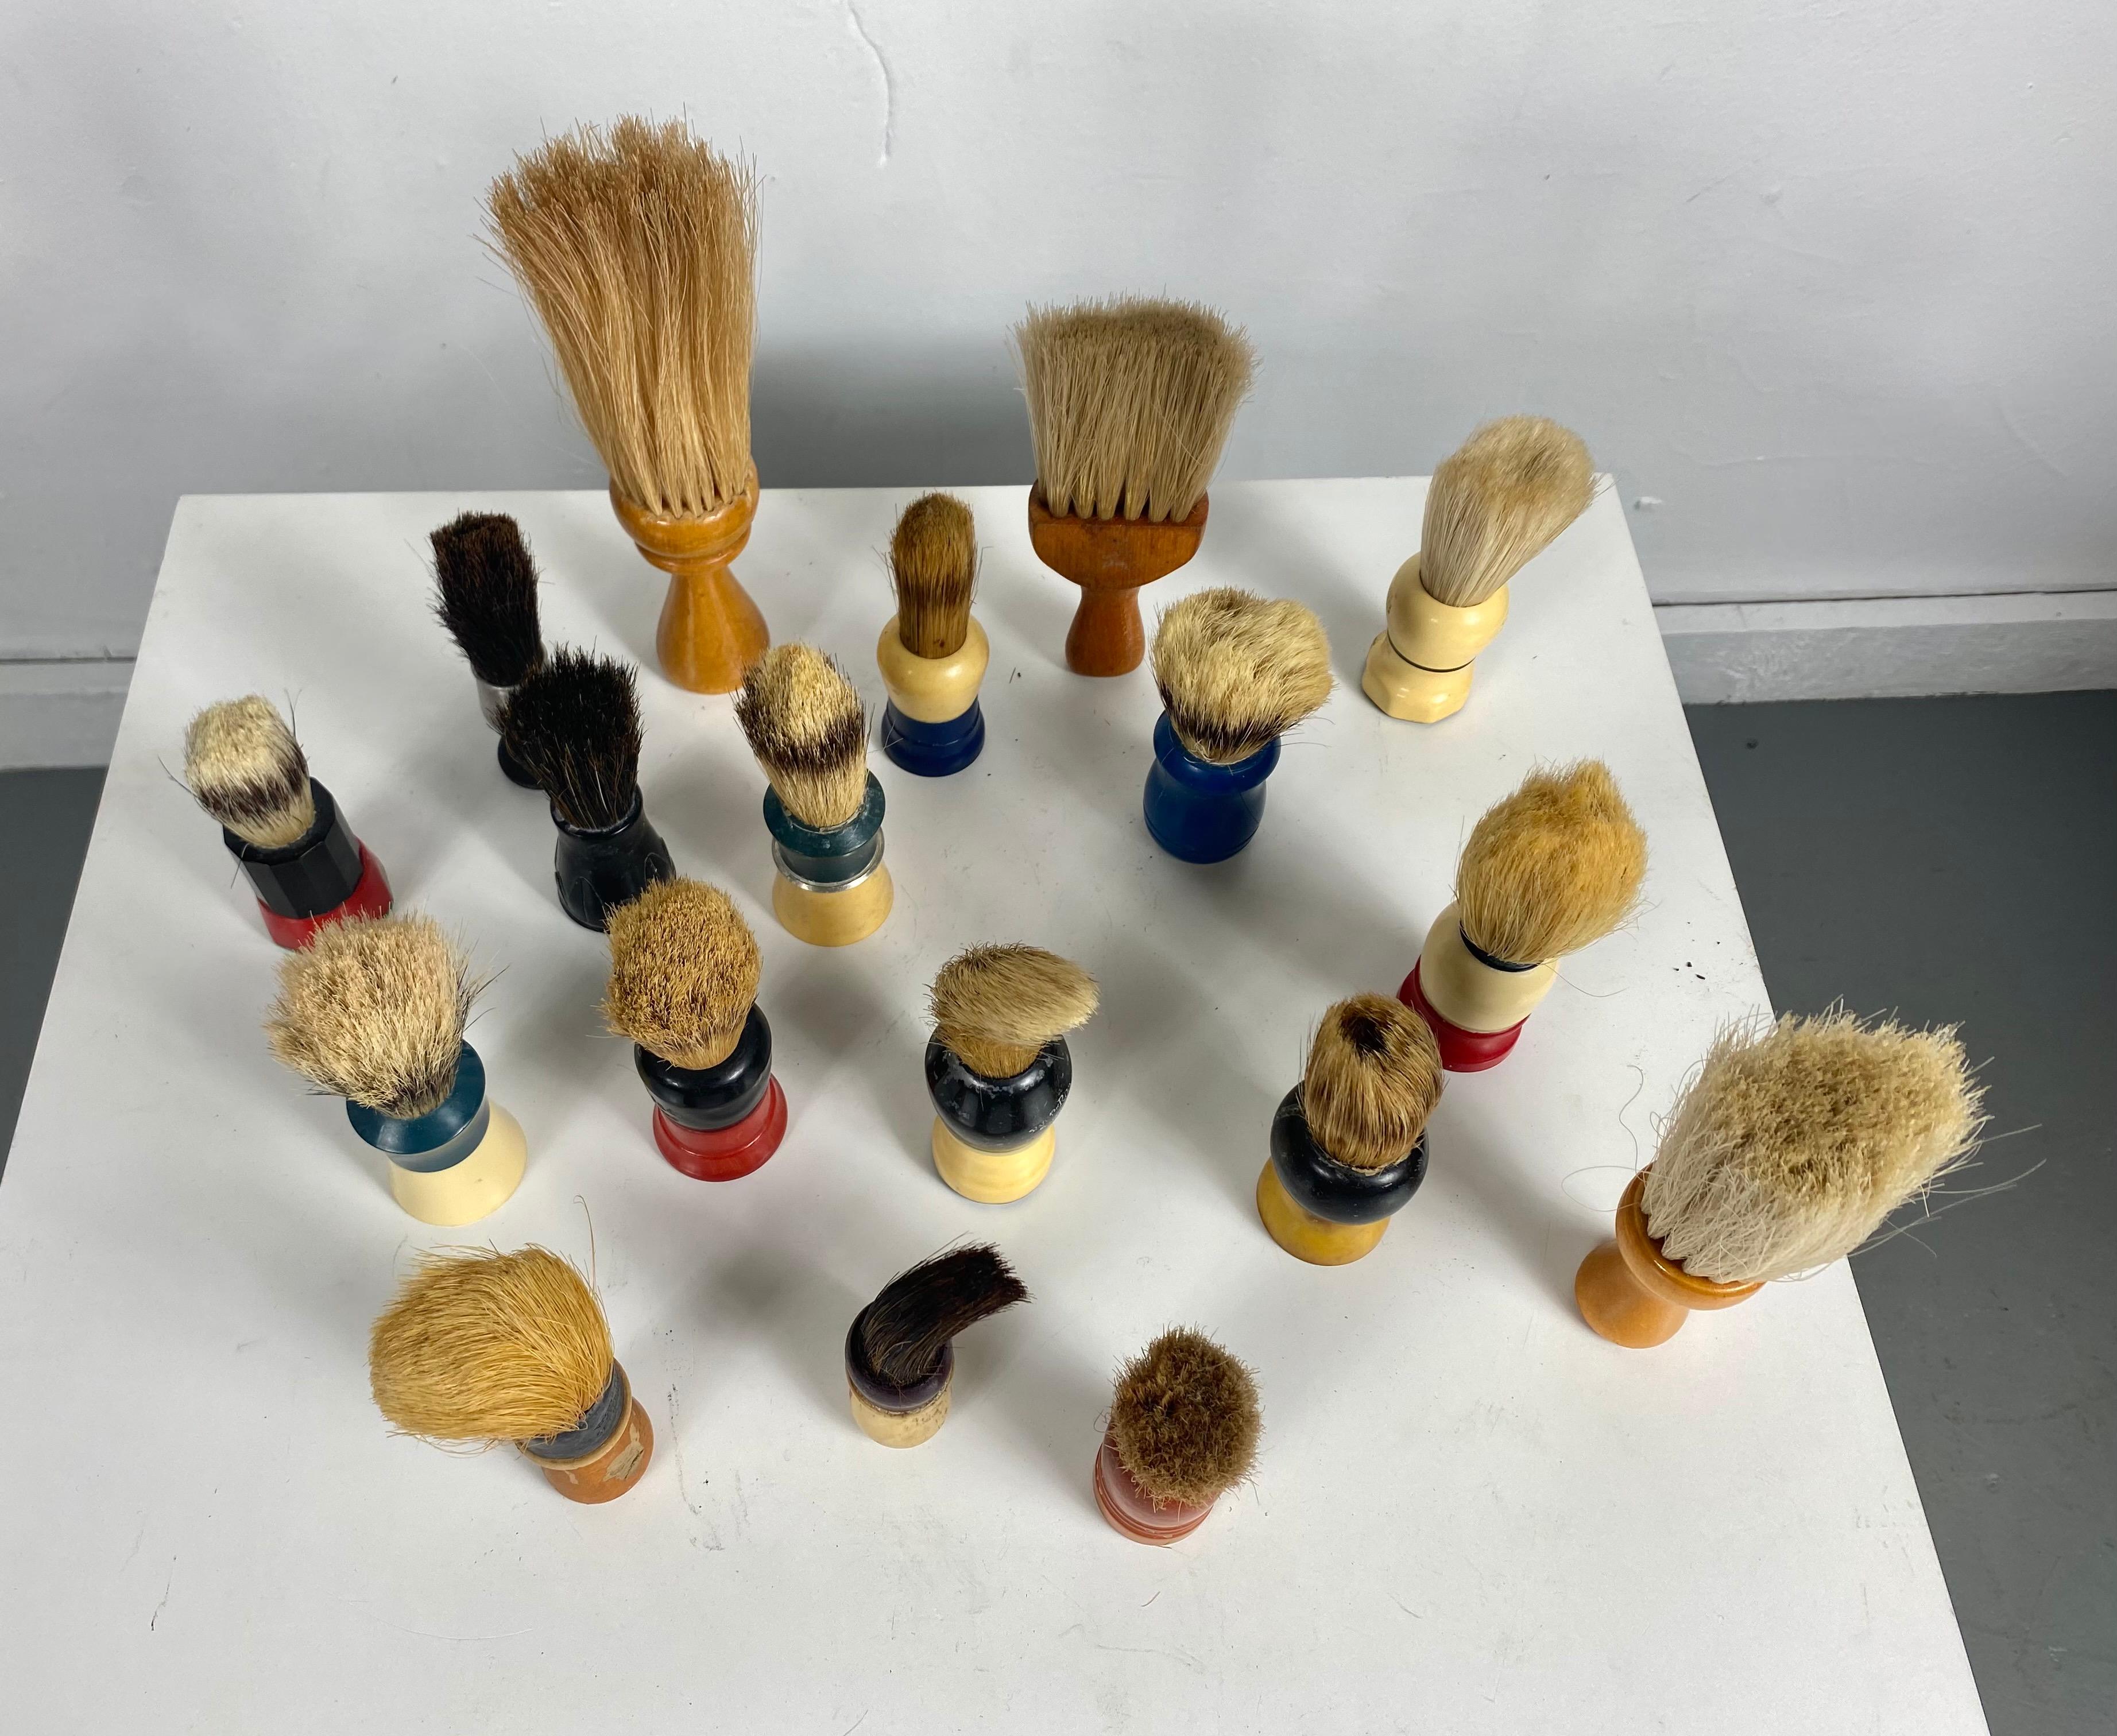 A collection of 17 distinctive vintage shaving brushes from the 1940s-1950s. Great design, colors, bakelite, carved plastic, wood. Horsehair, nylon, wonderful display or objects, several different manufactures.